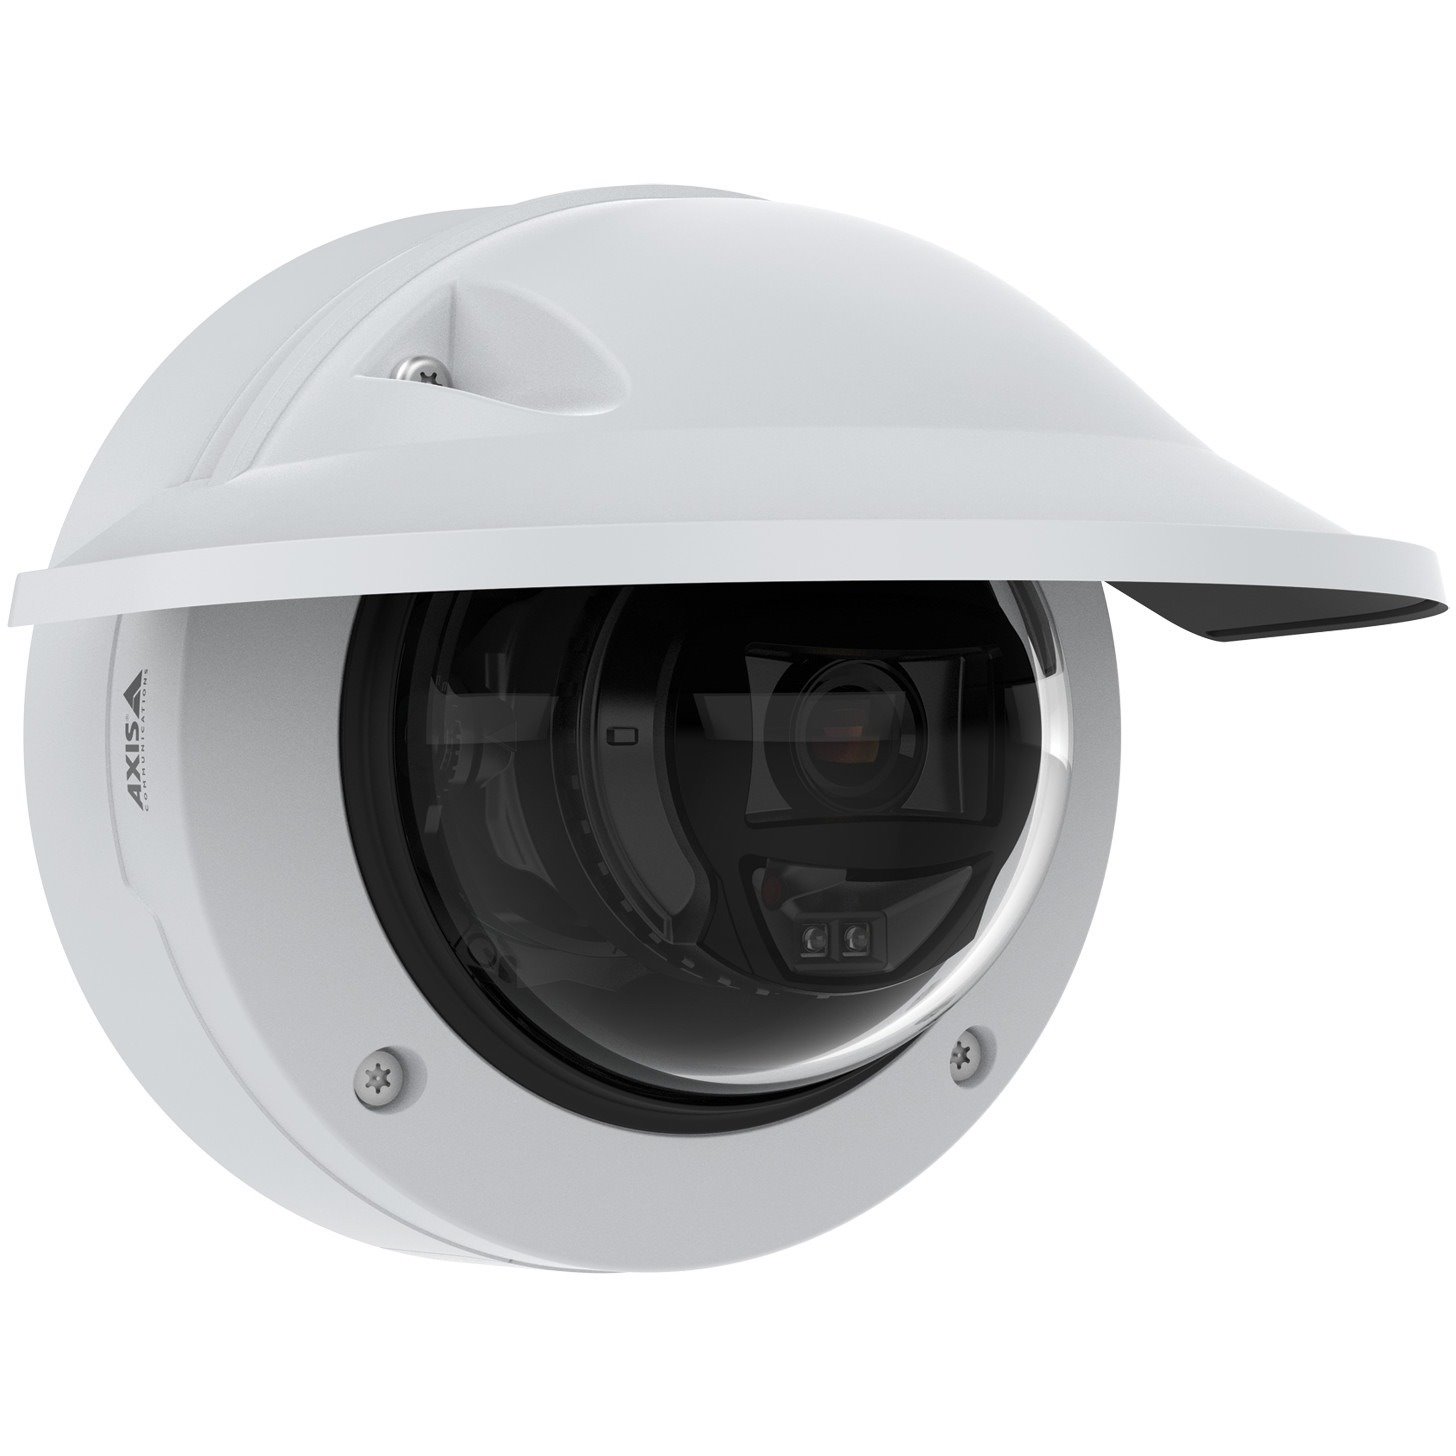 AXIS P3265-LVE 2 Megapixel Outdoor Full HD Network Camera - Colour - Dome